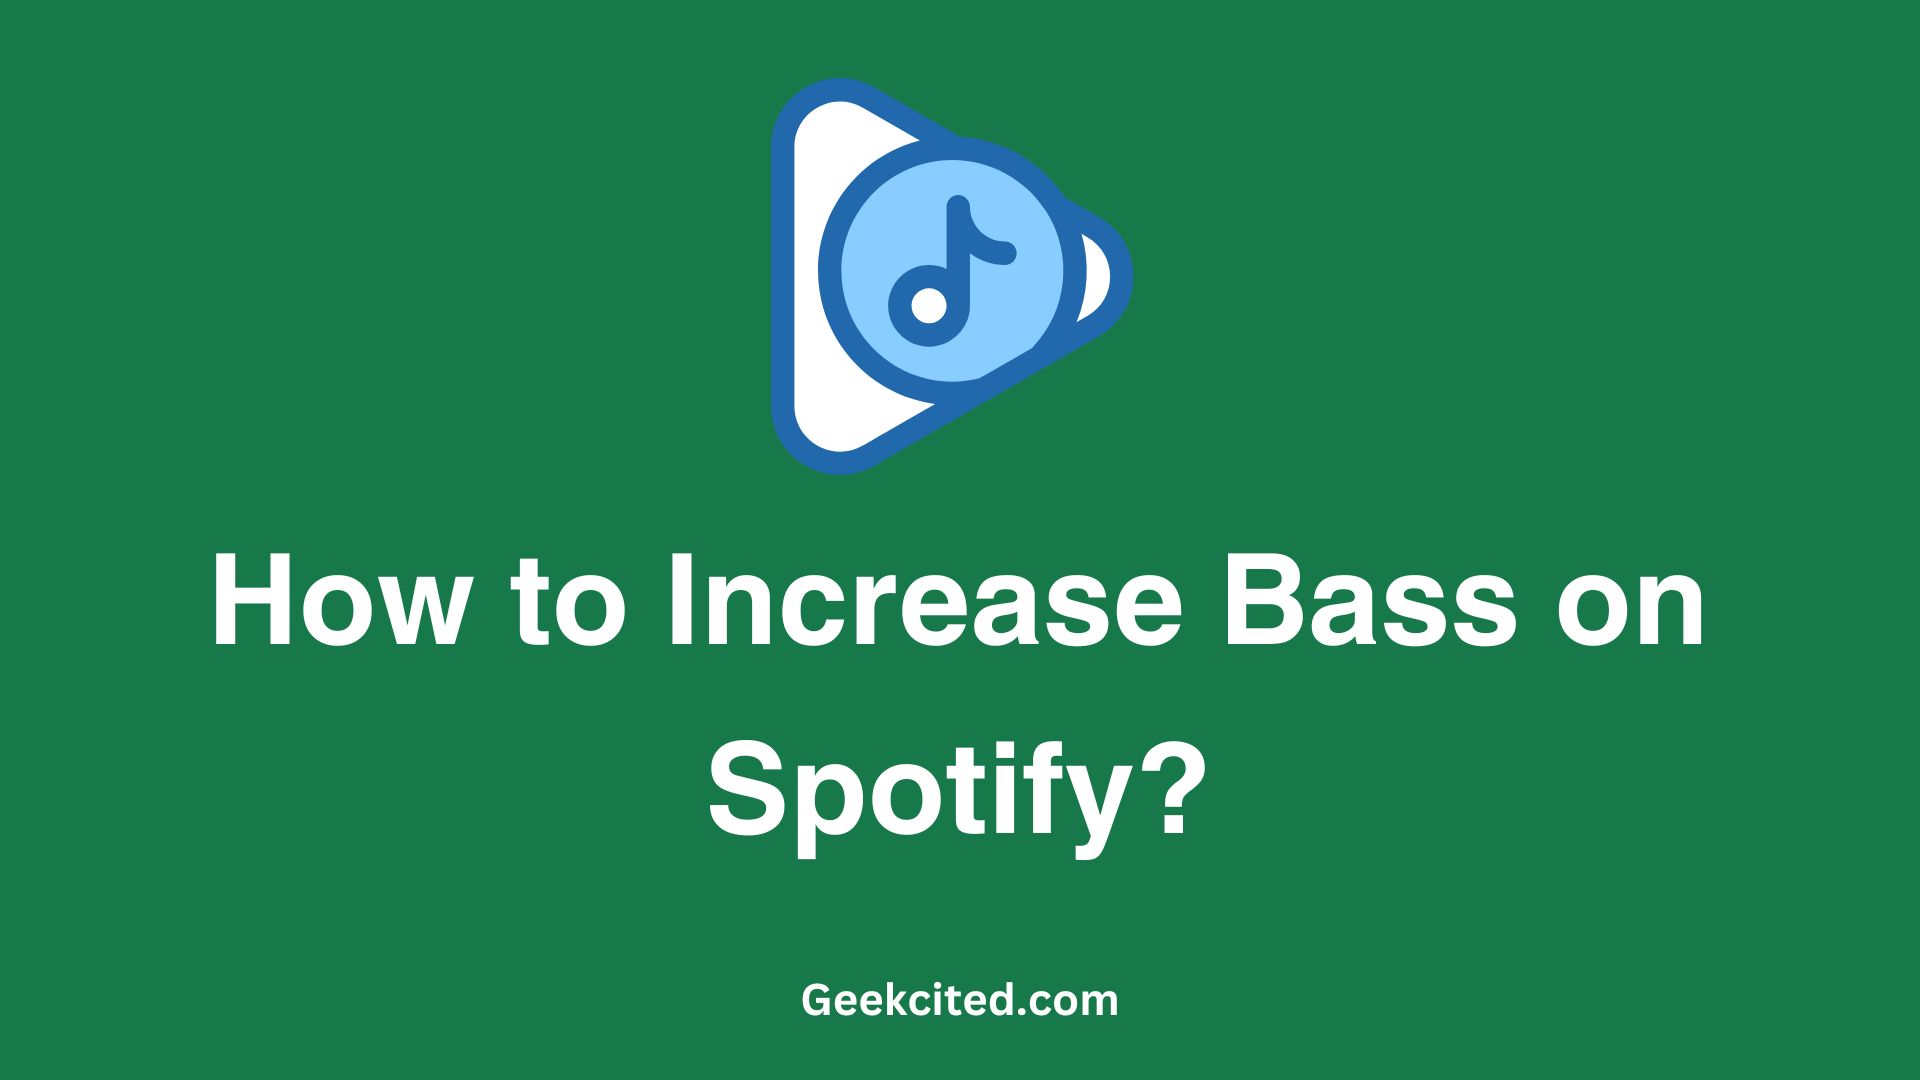 How to Increase Bass on Spotify